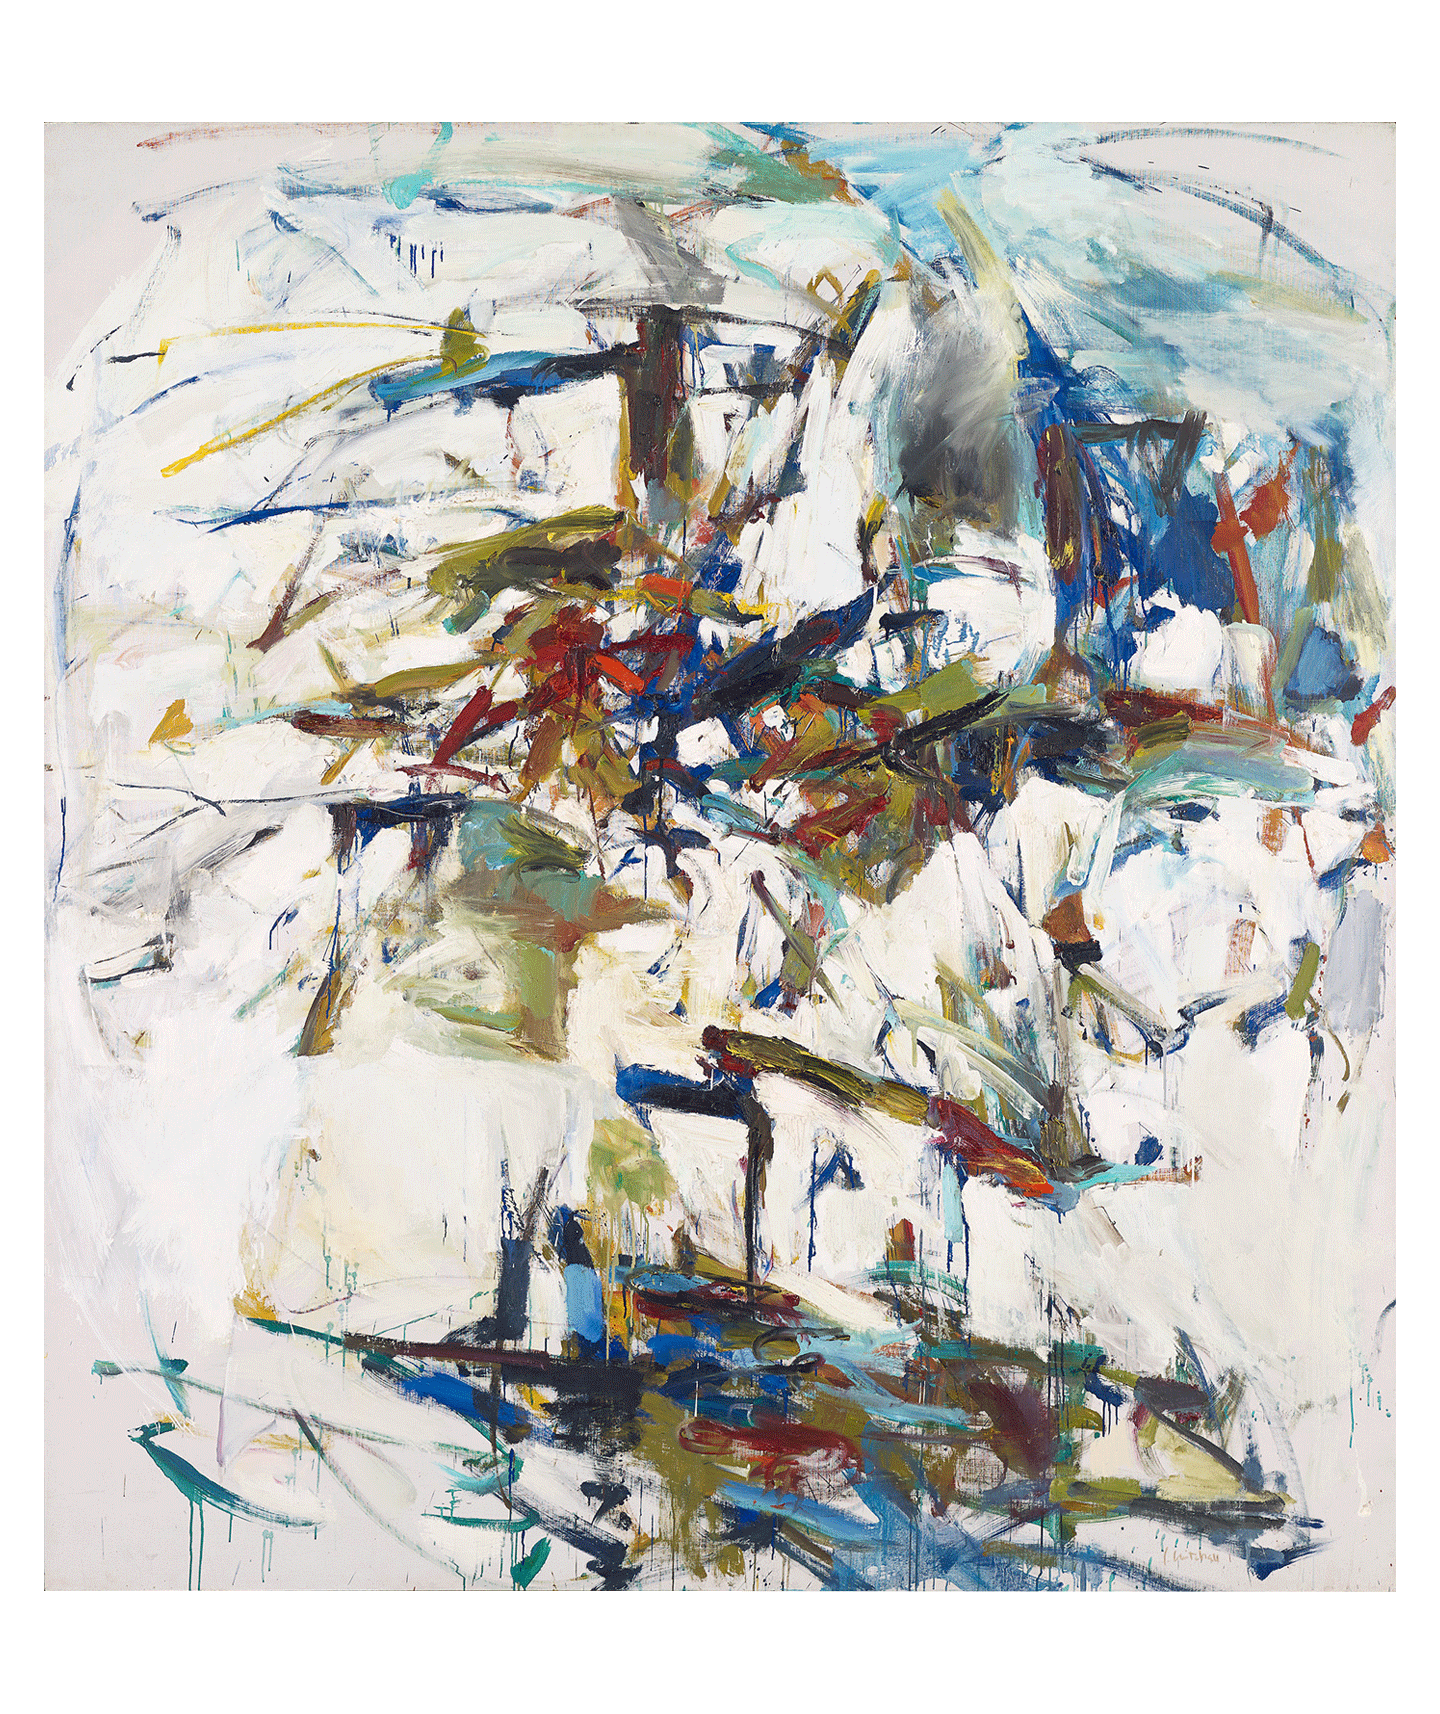 A painting by Joan Mitchell, titled George Went Swimming at Barnes Hole, but it Got Too Cold, dated 1957.